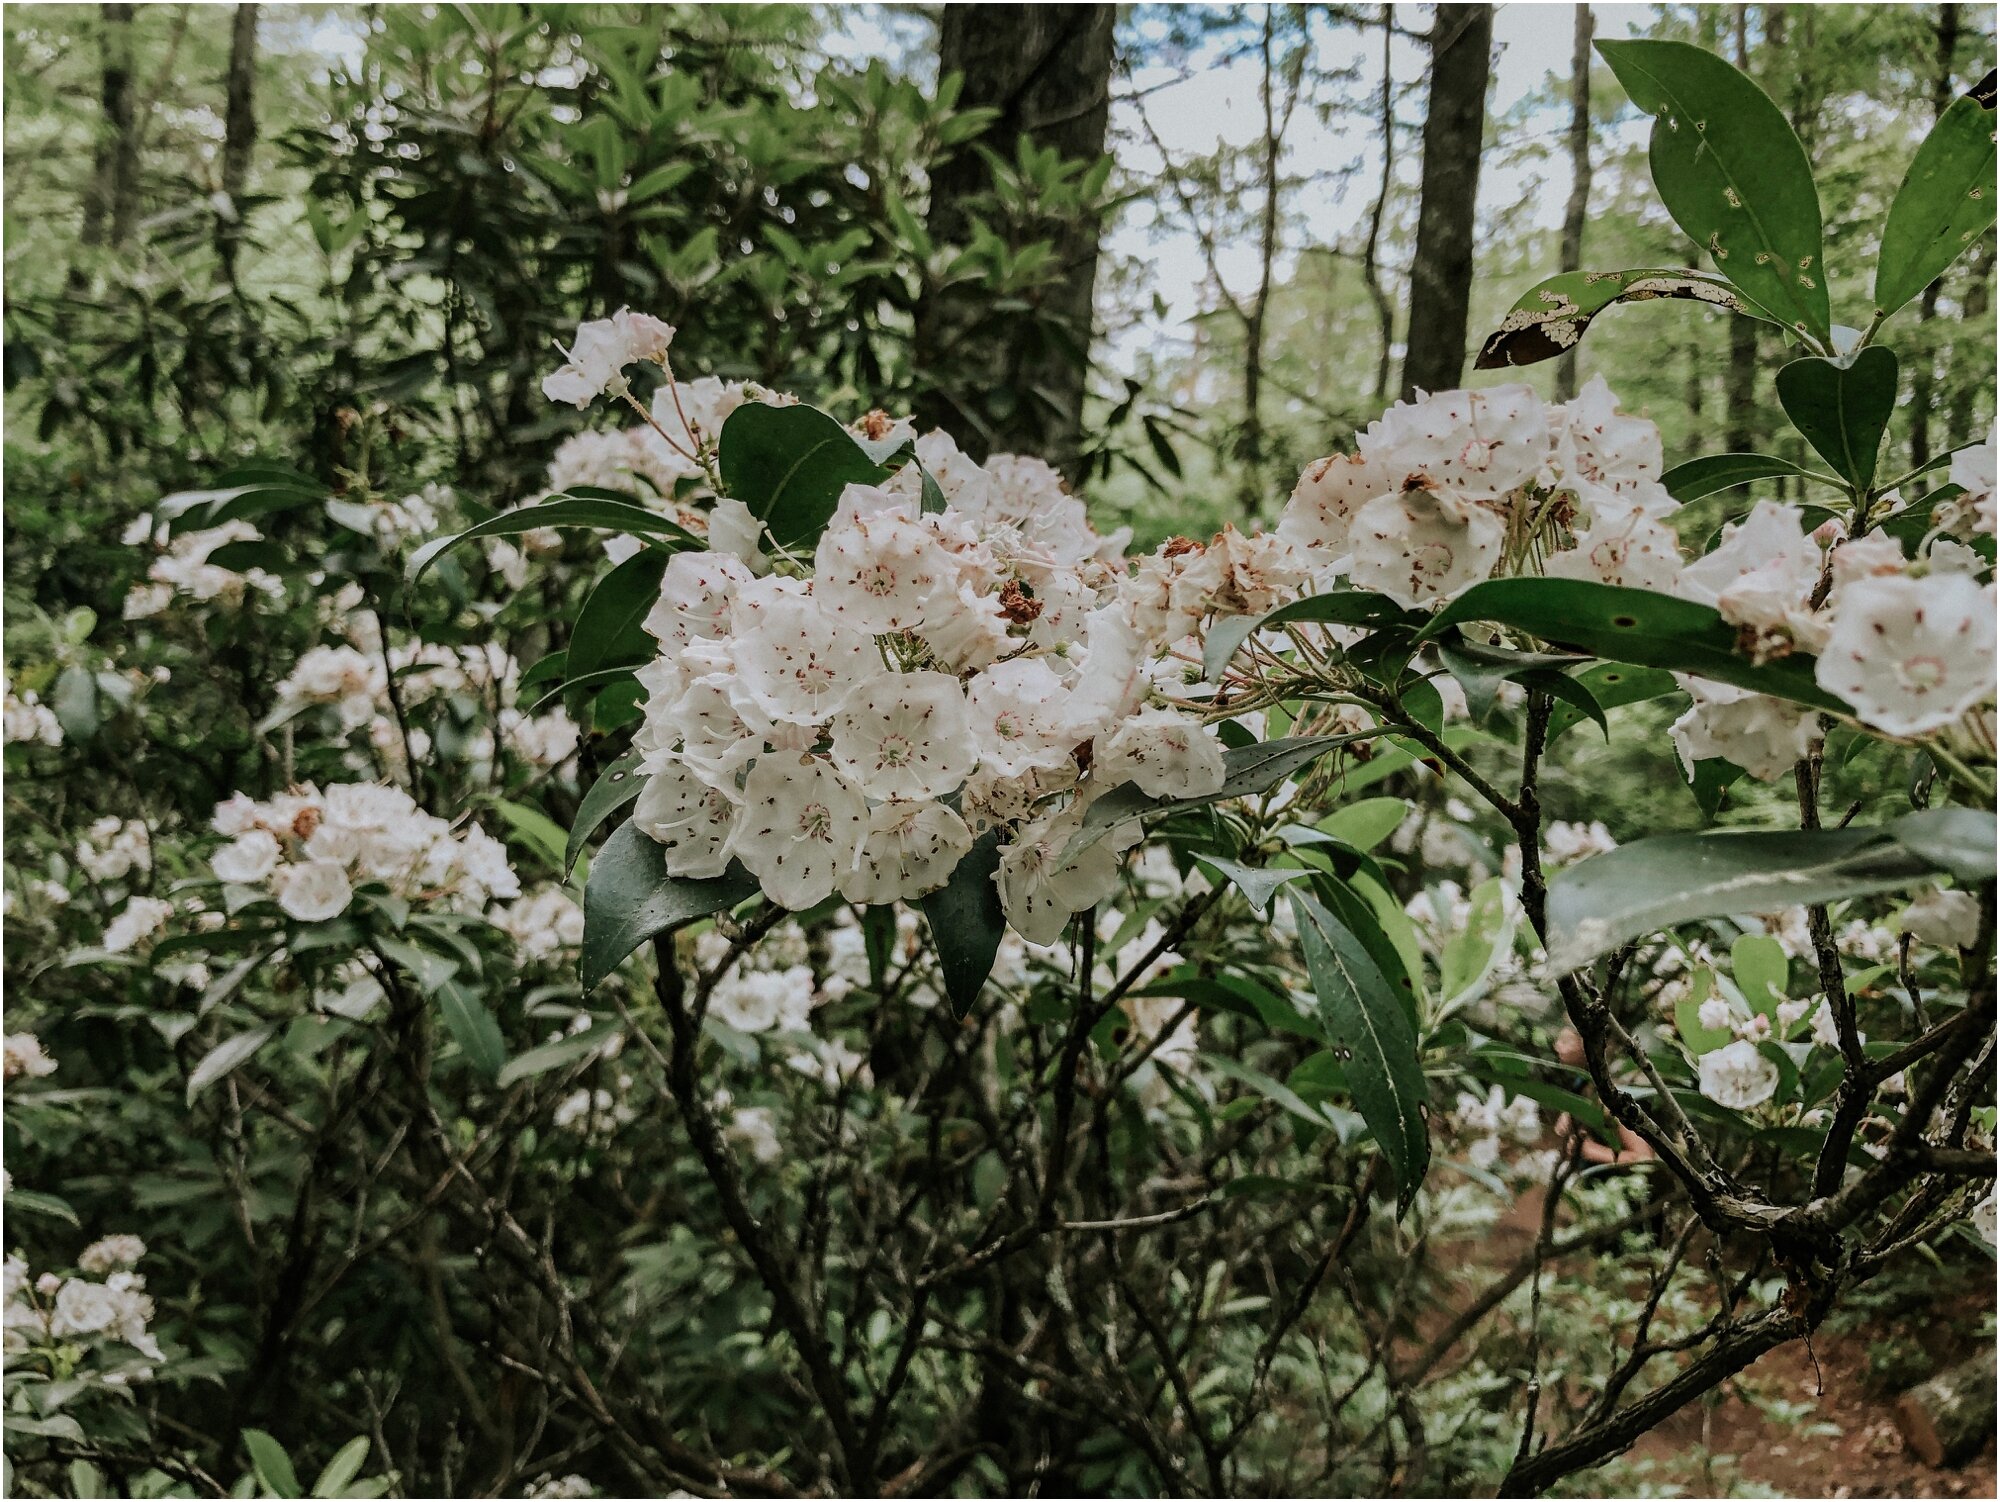   Finally got to see blooming mountain laurel in person! This appalachian floral is my favorite for many reasons and will always hold a special place in my heart (which is why it’s also in my logo).  